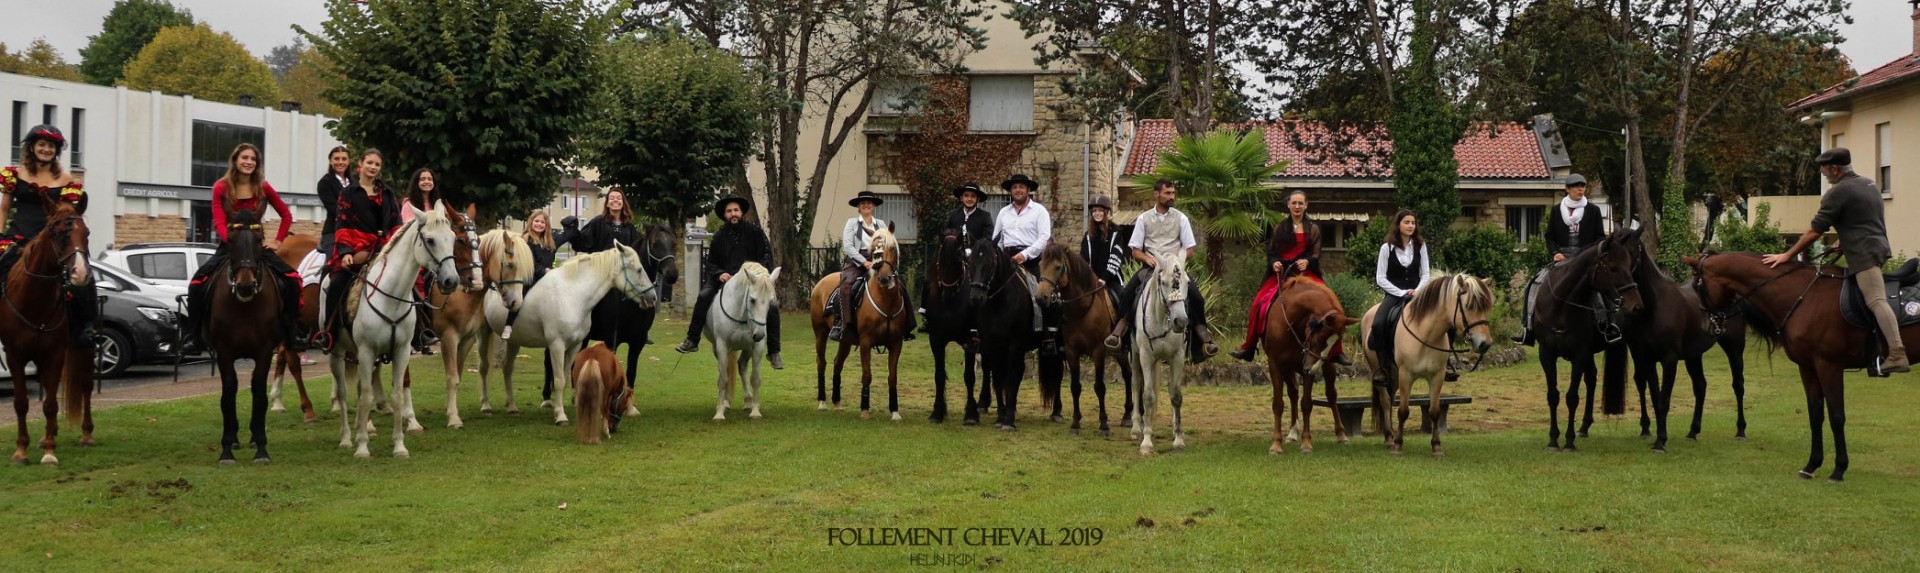 Follement cheval 2019